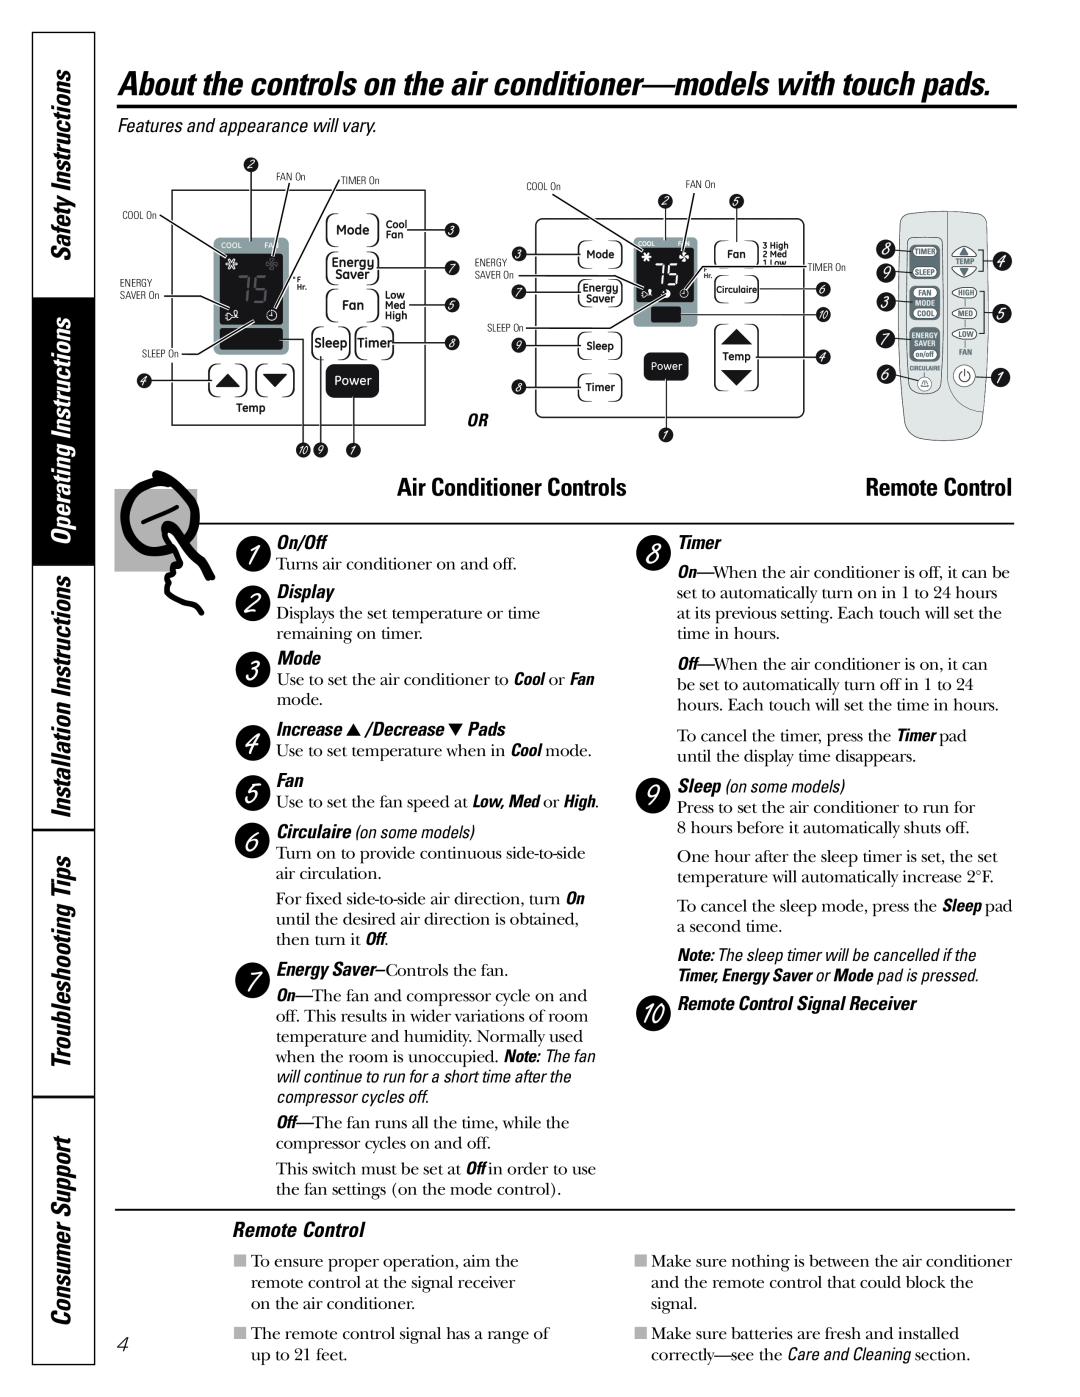 GE ASM06* Operating Instructions Safety Instructions, Consumer, Remote Control, Circulaire on some models 